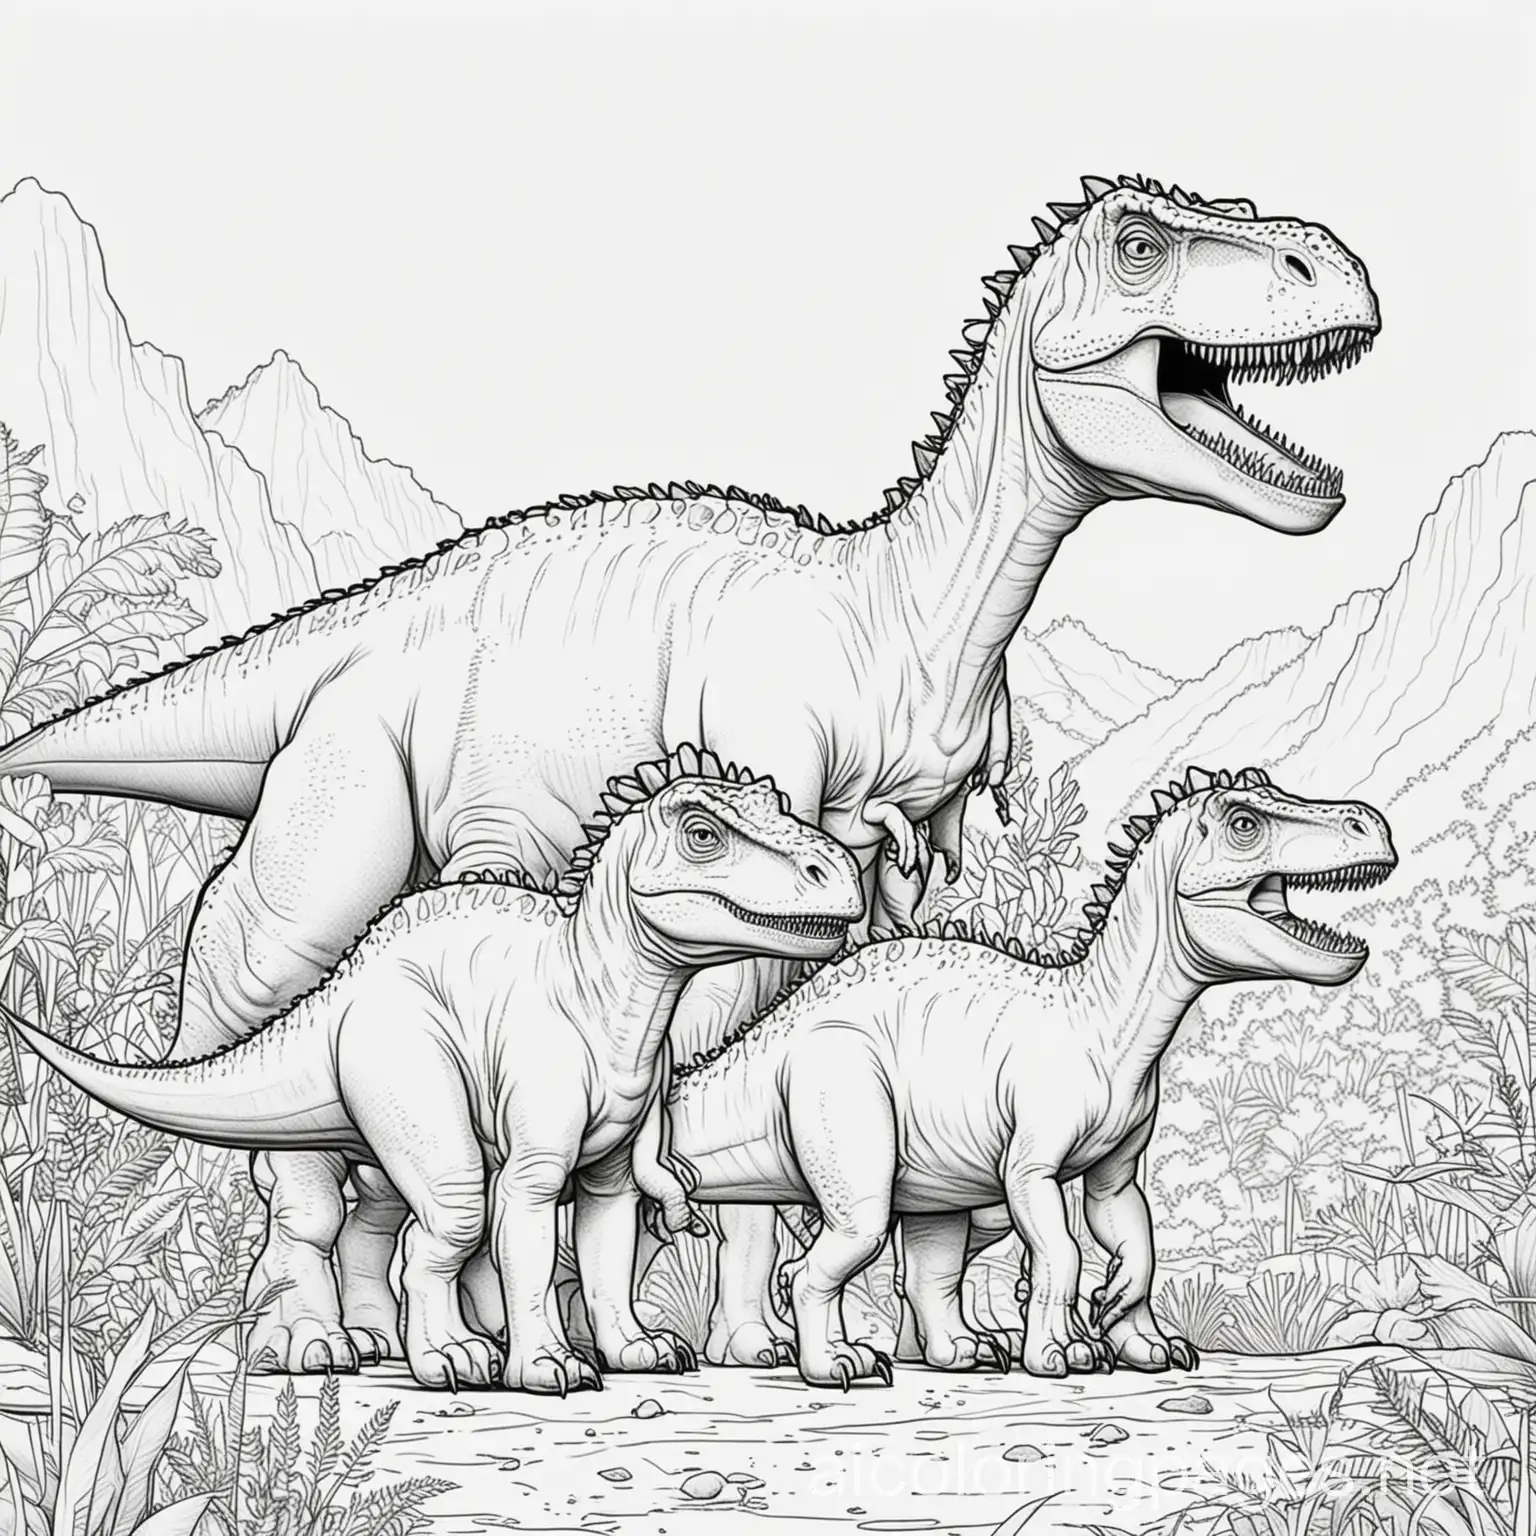 Dinosaur-Family-Coloring-Page-Simple-Black-and-White-Line-Art